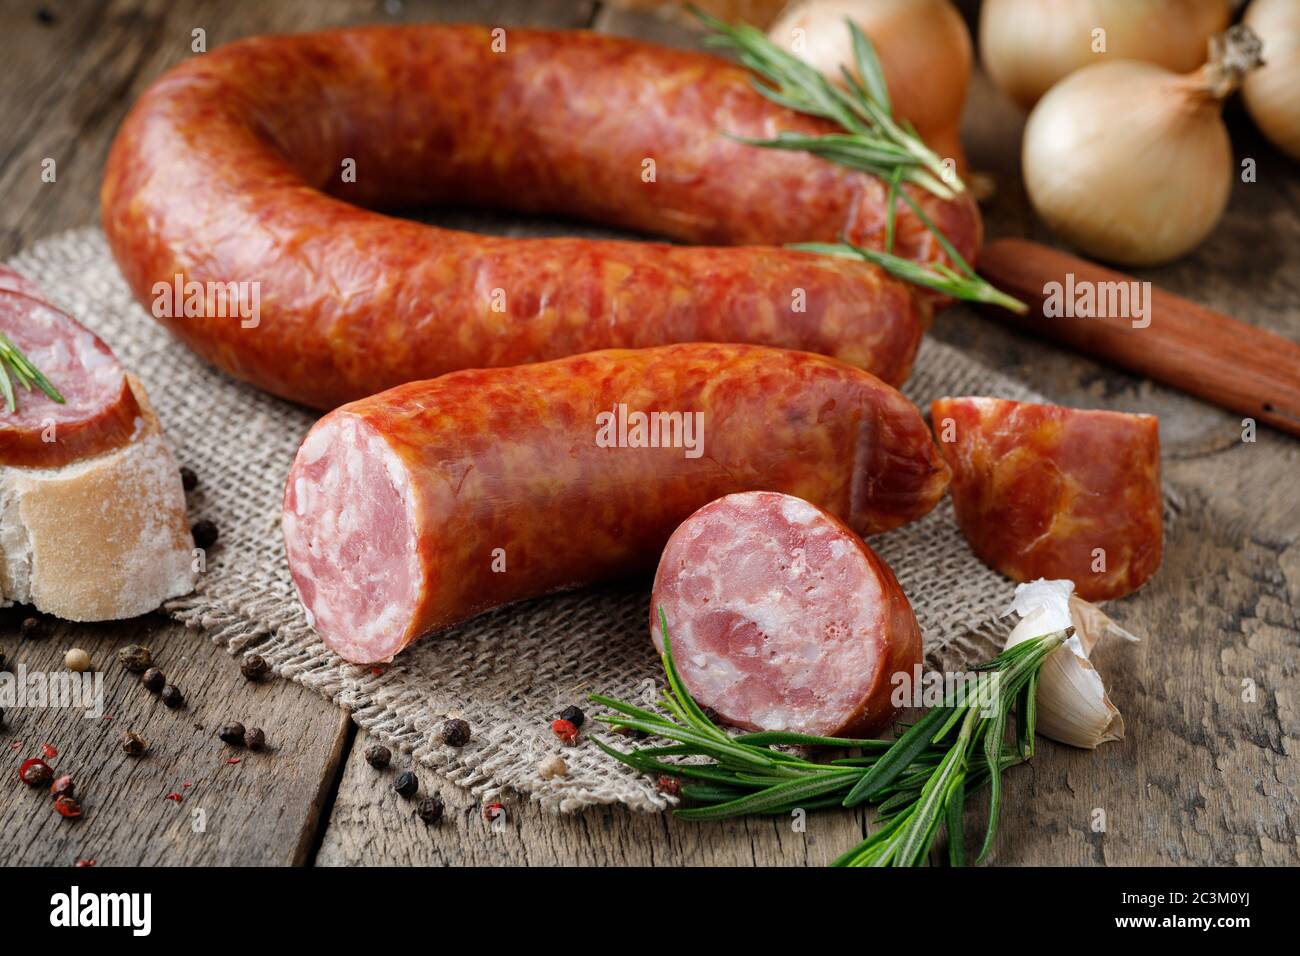 Smoked sausage on a wooden table. Rustic style. Stock Photo